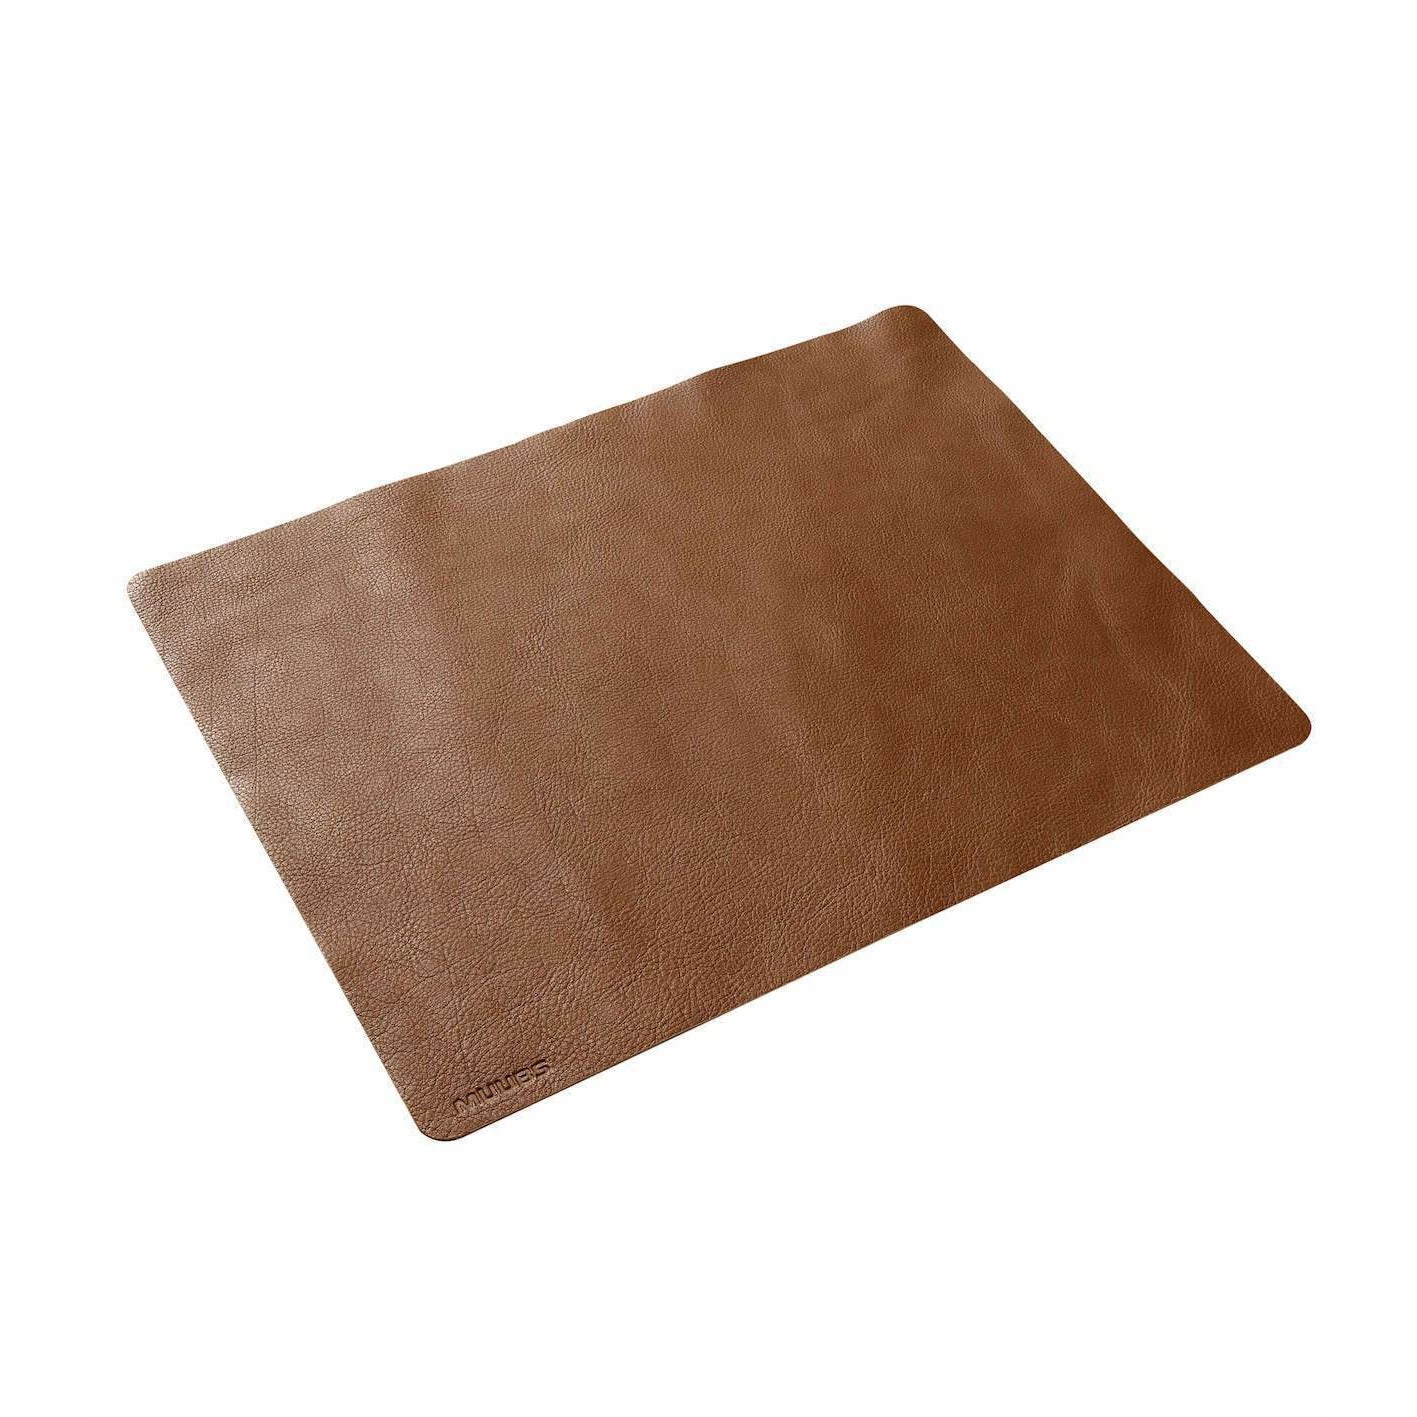 Muubs Camou Placemat 45cm, brunt skinn